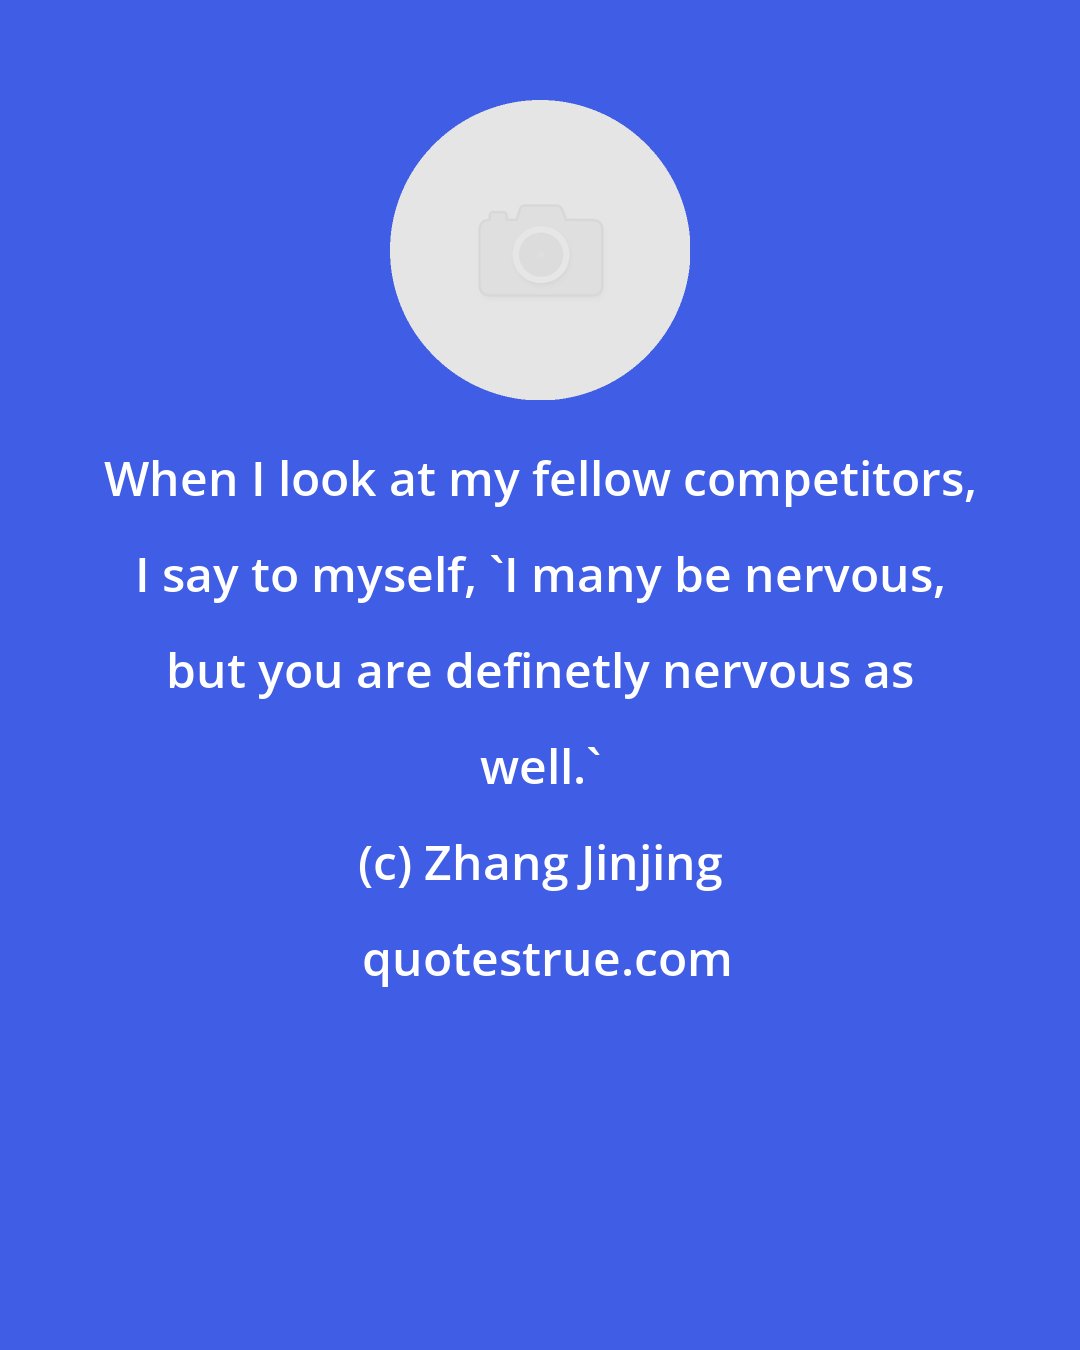 Zhang Jinjing: When I look at my fellow competitors, I say to myself, 'I many be nervous, but you are definetly nervous as well.'